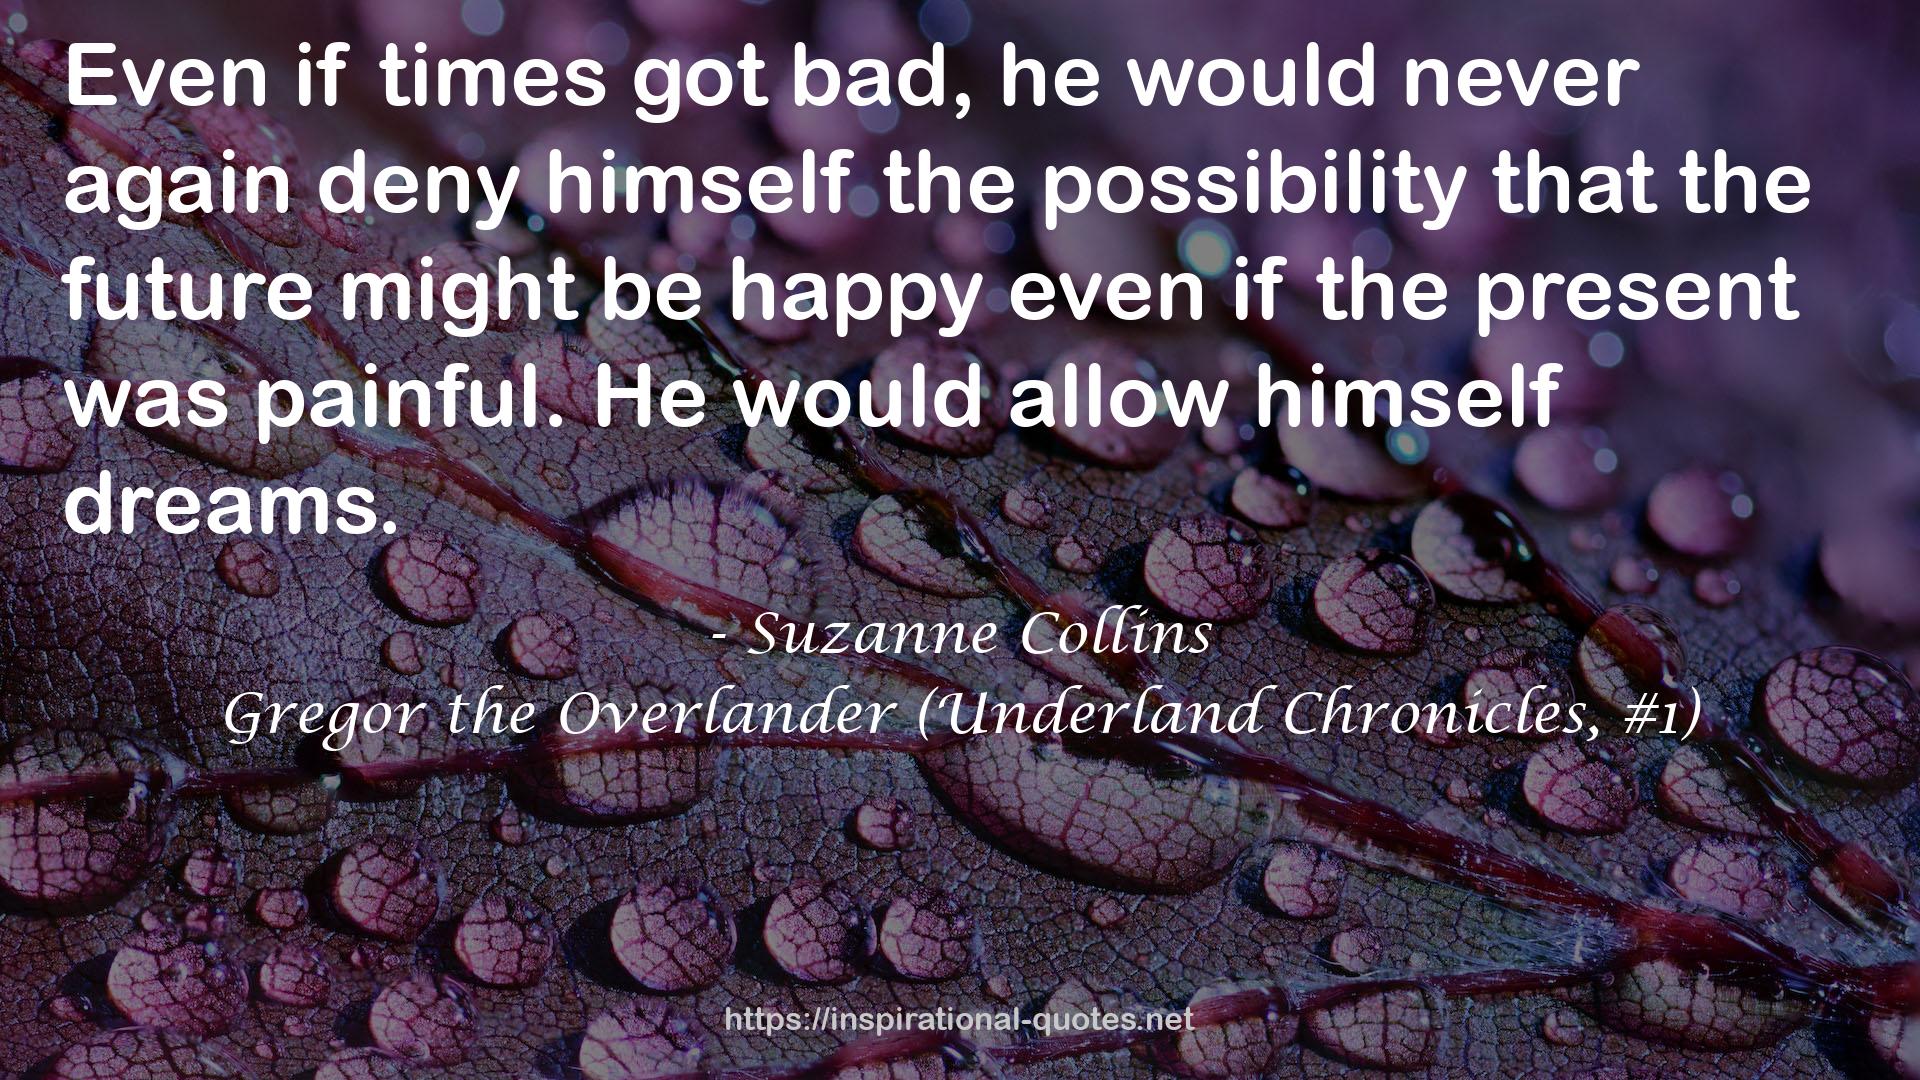 Gregor the Overlander (Underland Chronicles, #1) QUOTES